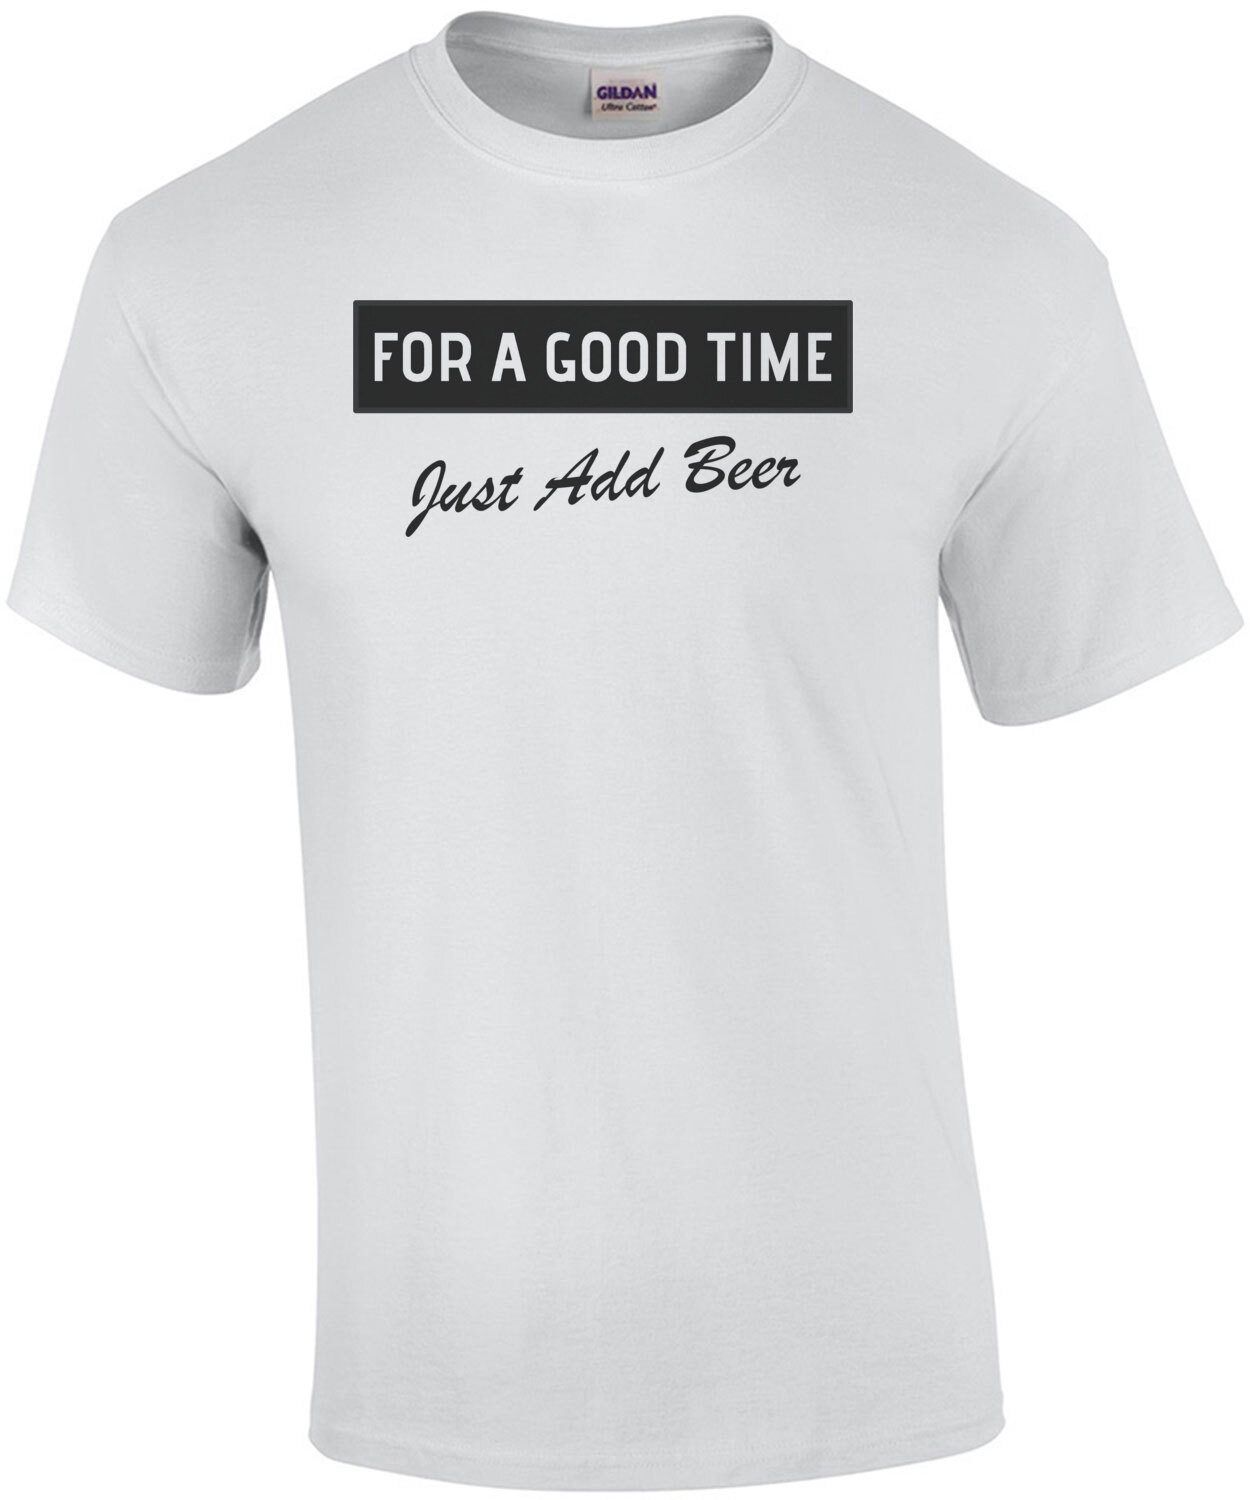 For A Good Time, Just Add Beer! T-Shirt